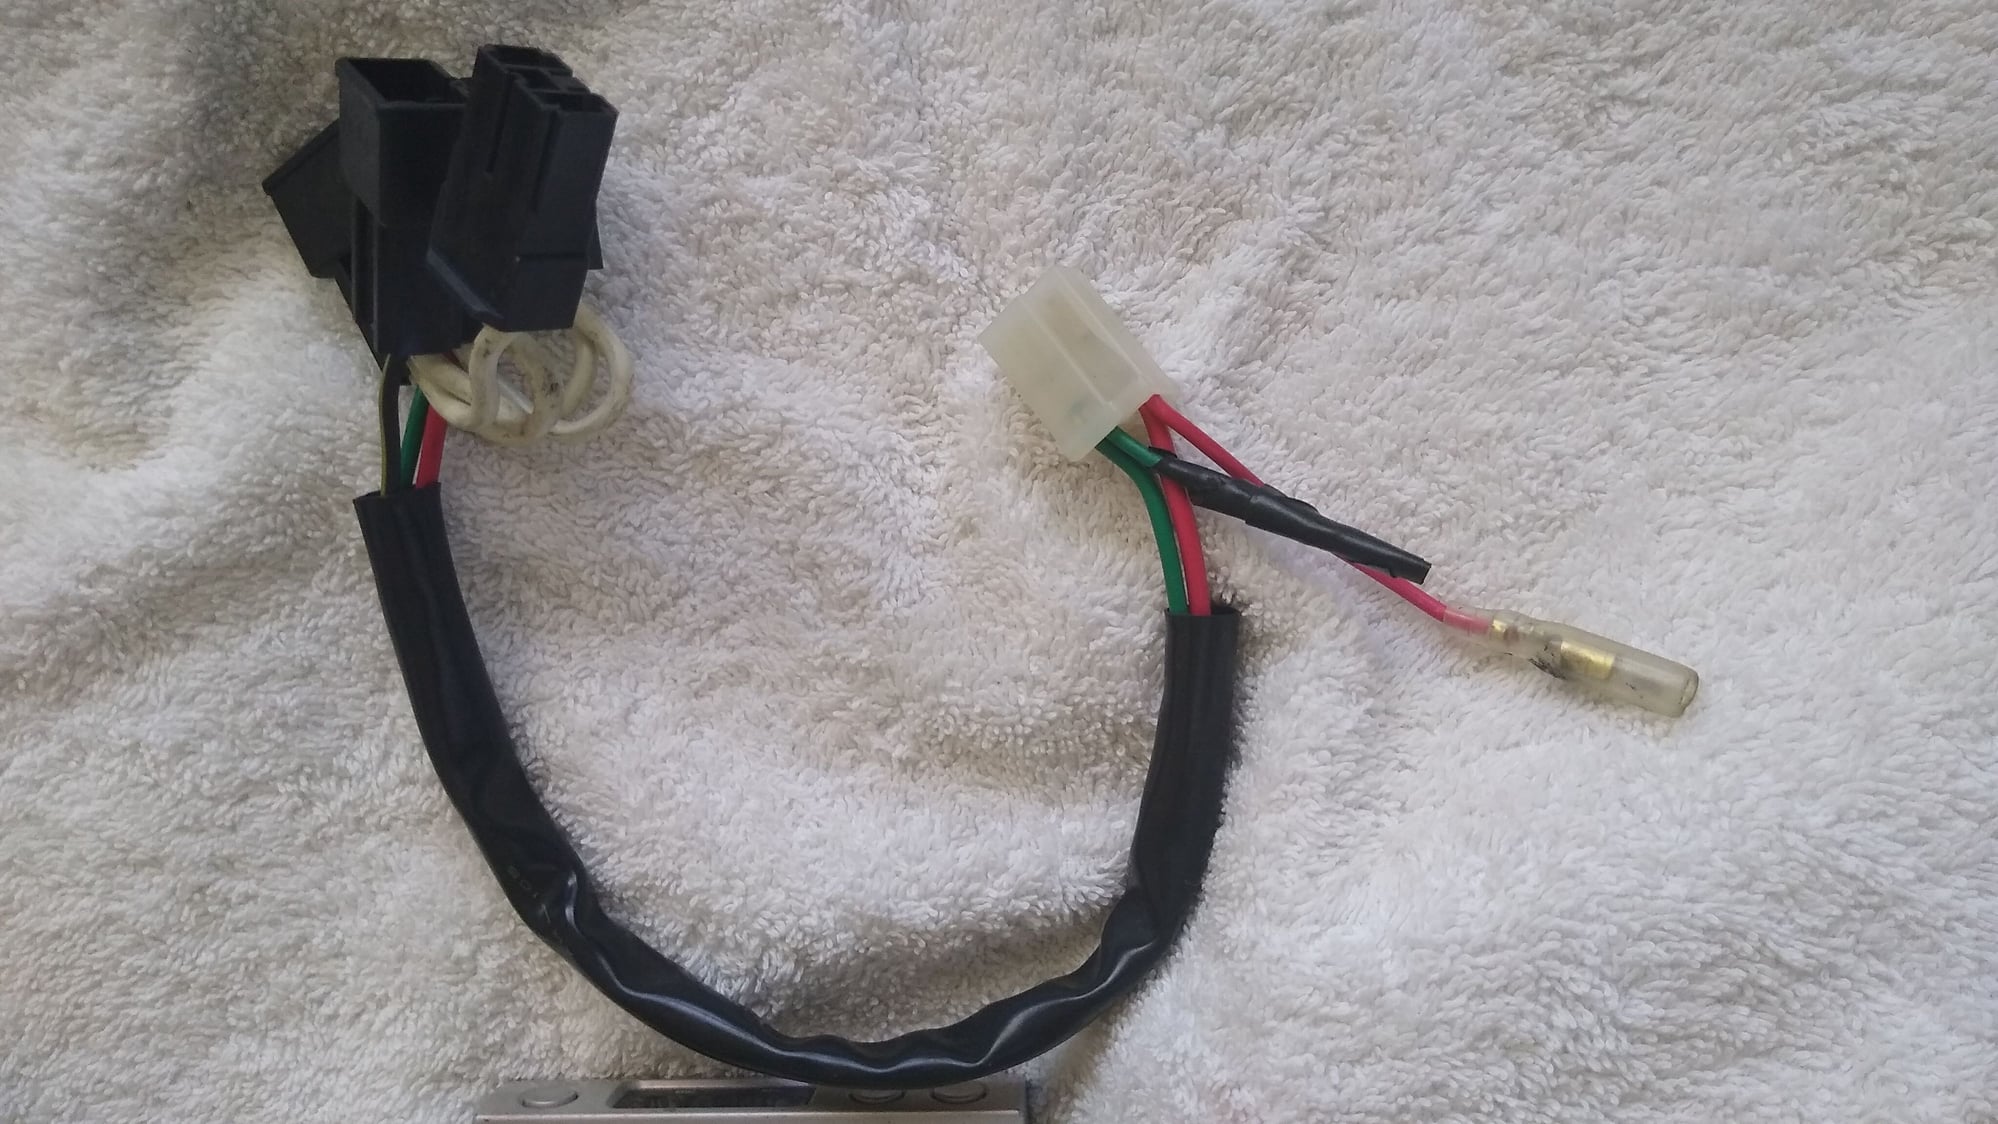 Miscellaneous - GReddy Turbo Timer & harness. - Used - 1993 to 1995 Mazda RX-7 - San Jose, CA 95121, United States